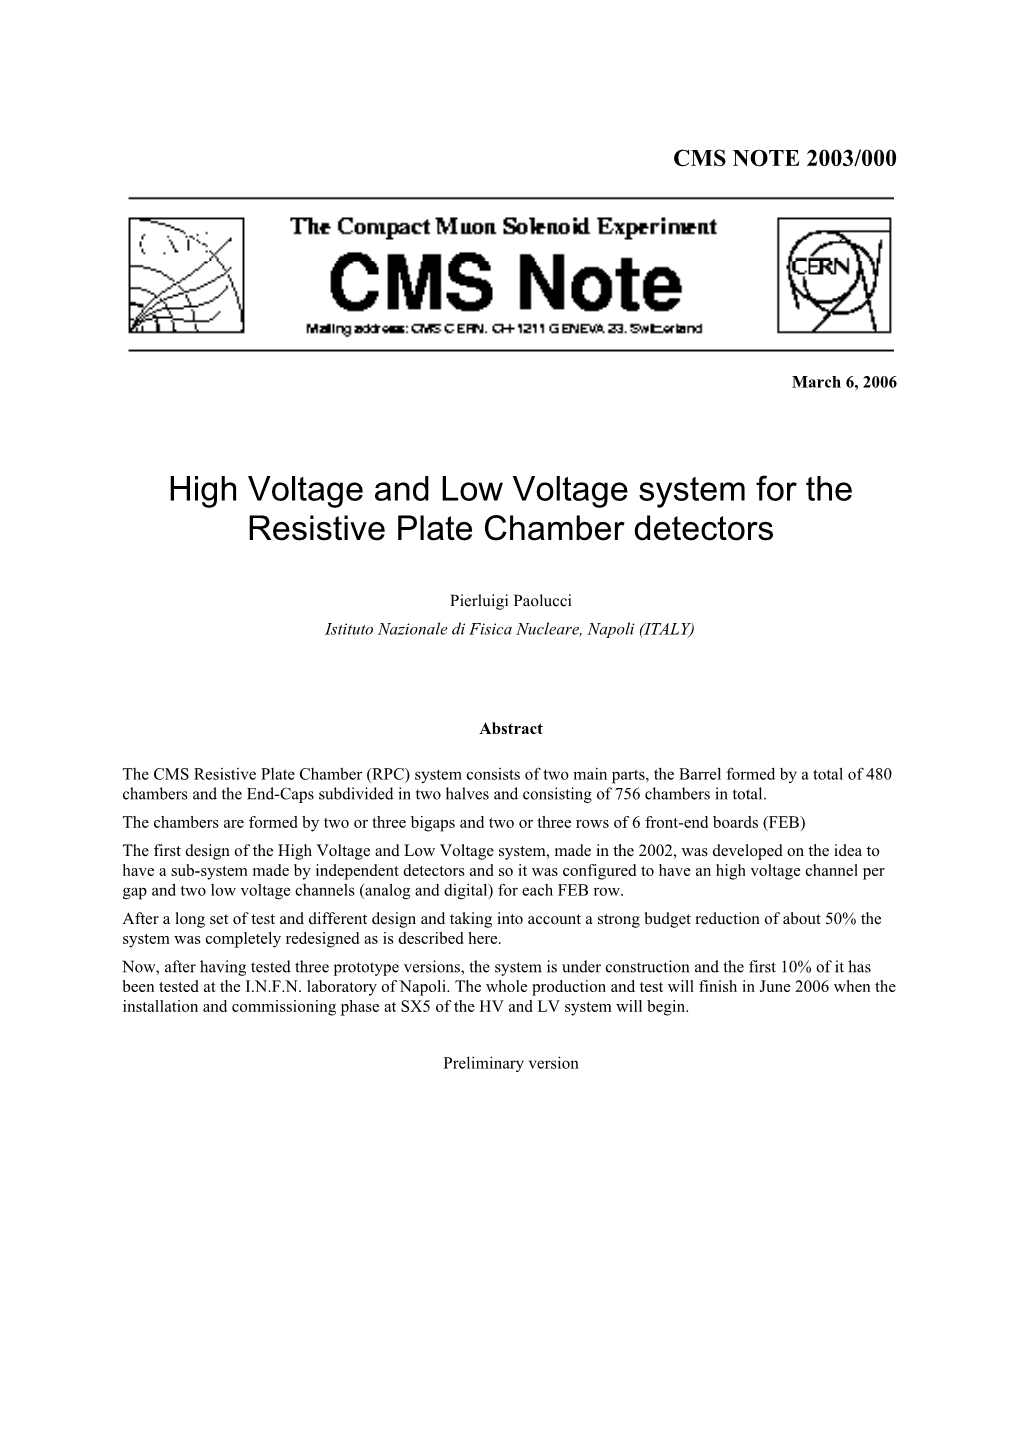 High Voltage and Low Voltage System for the Resistive Plate Chamber Detectors